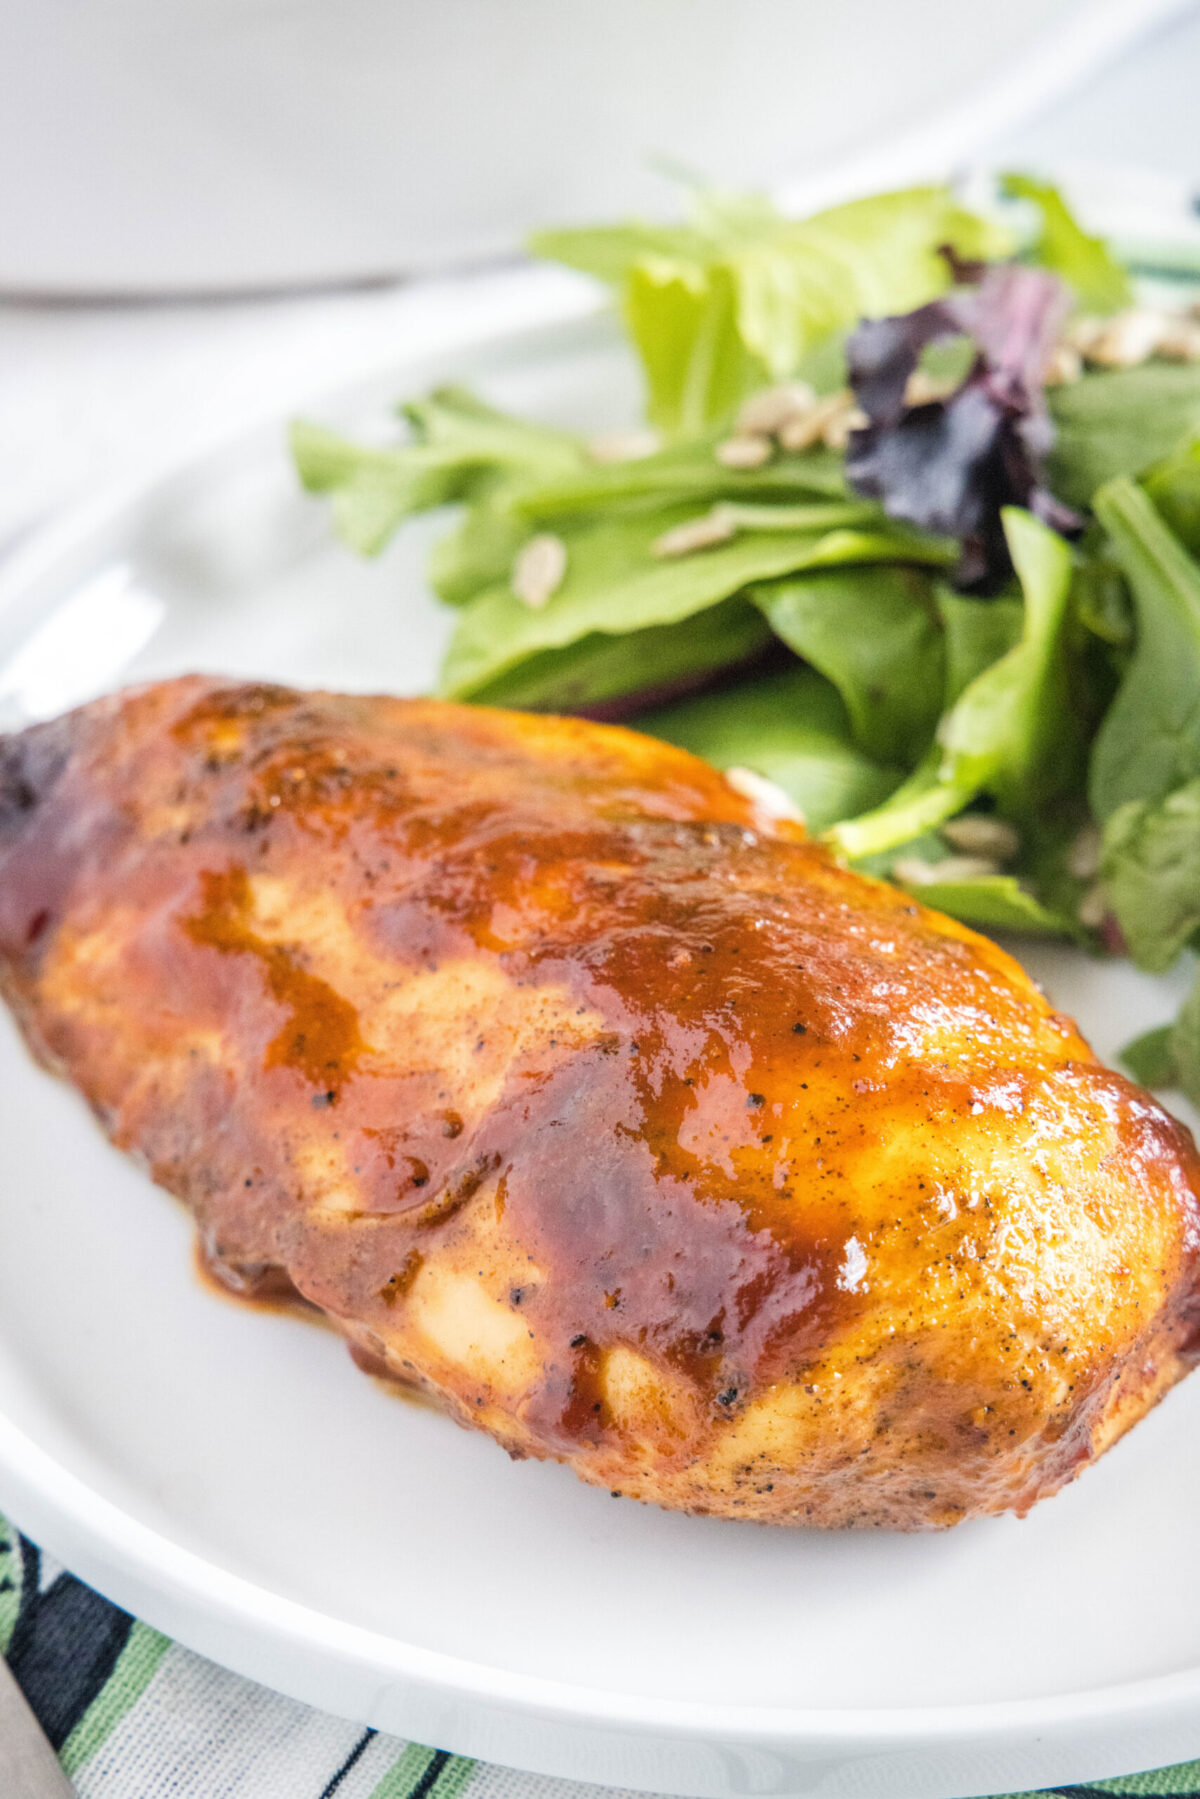 A BBQ chicken breast on a plate with salad